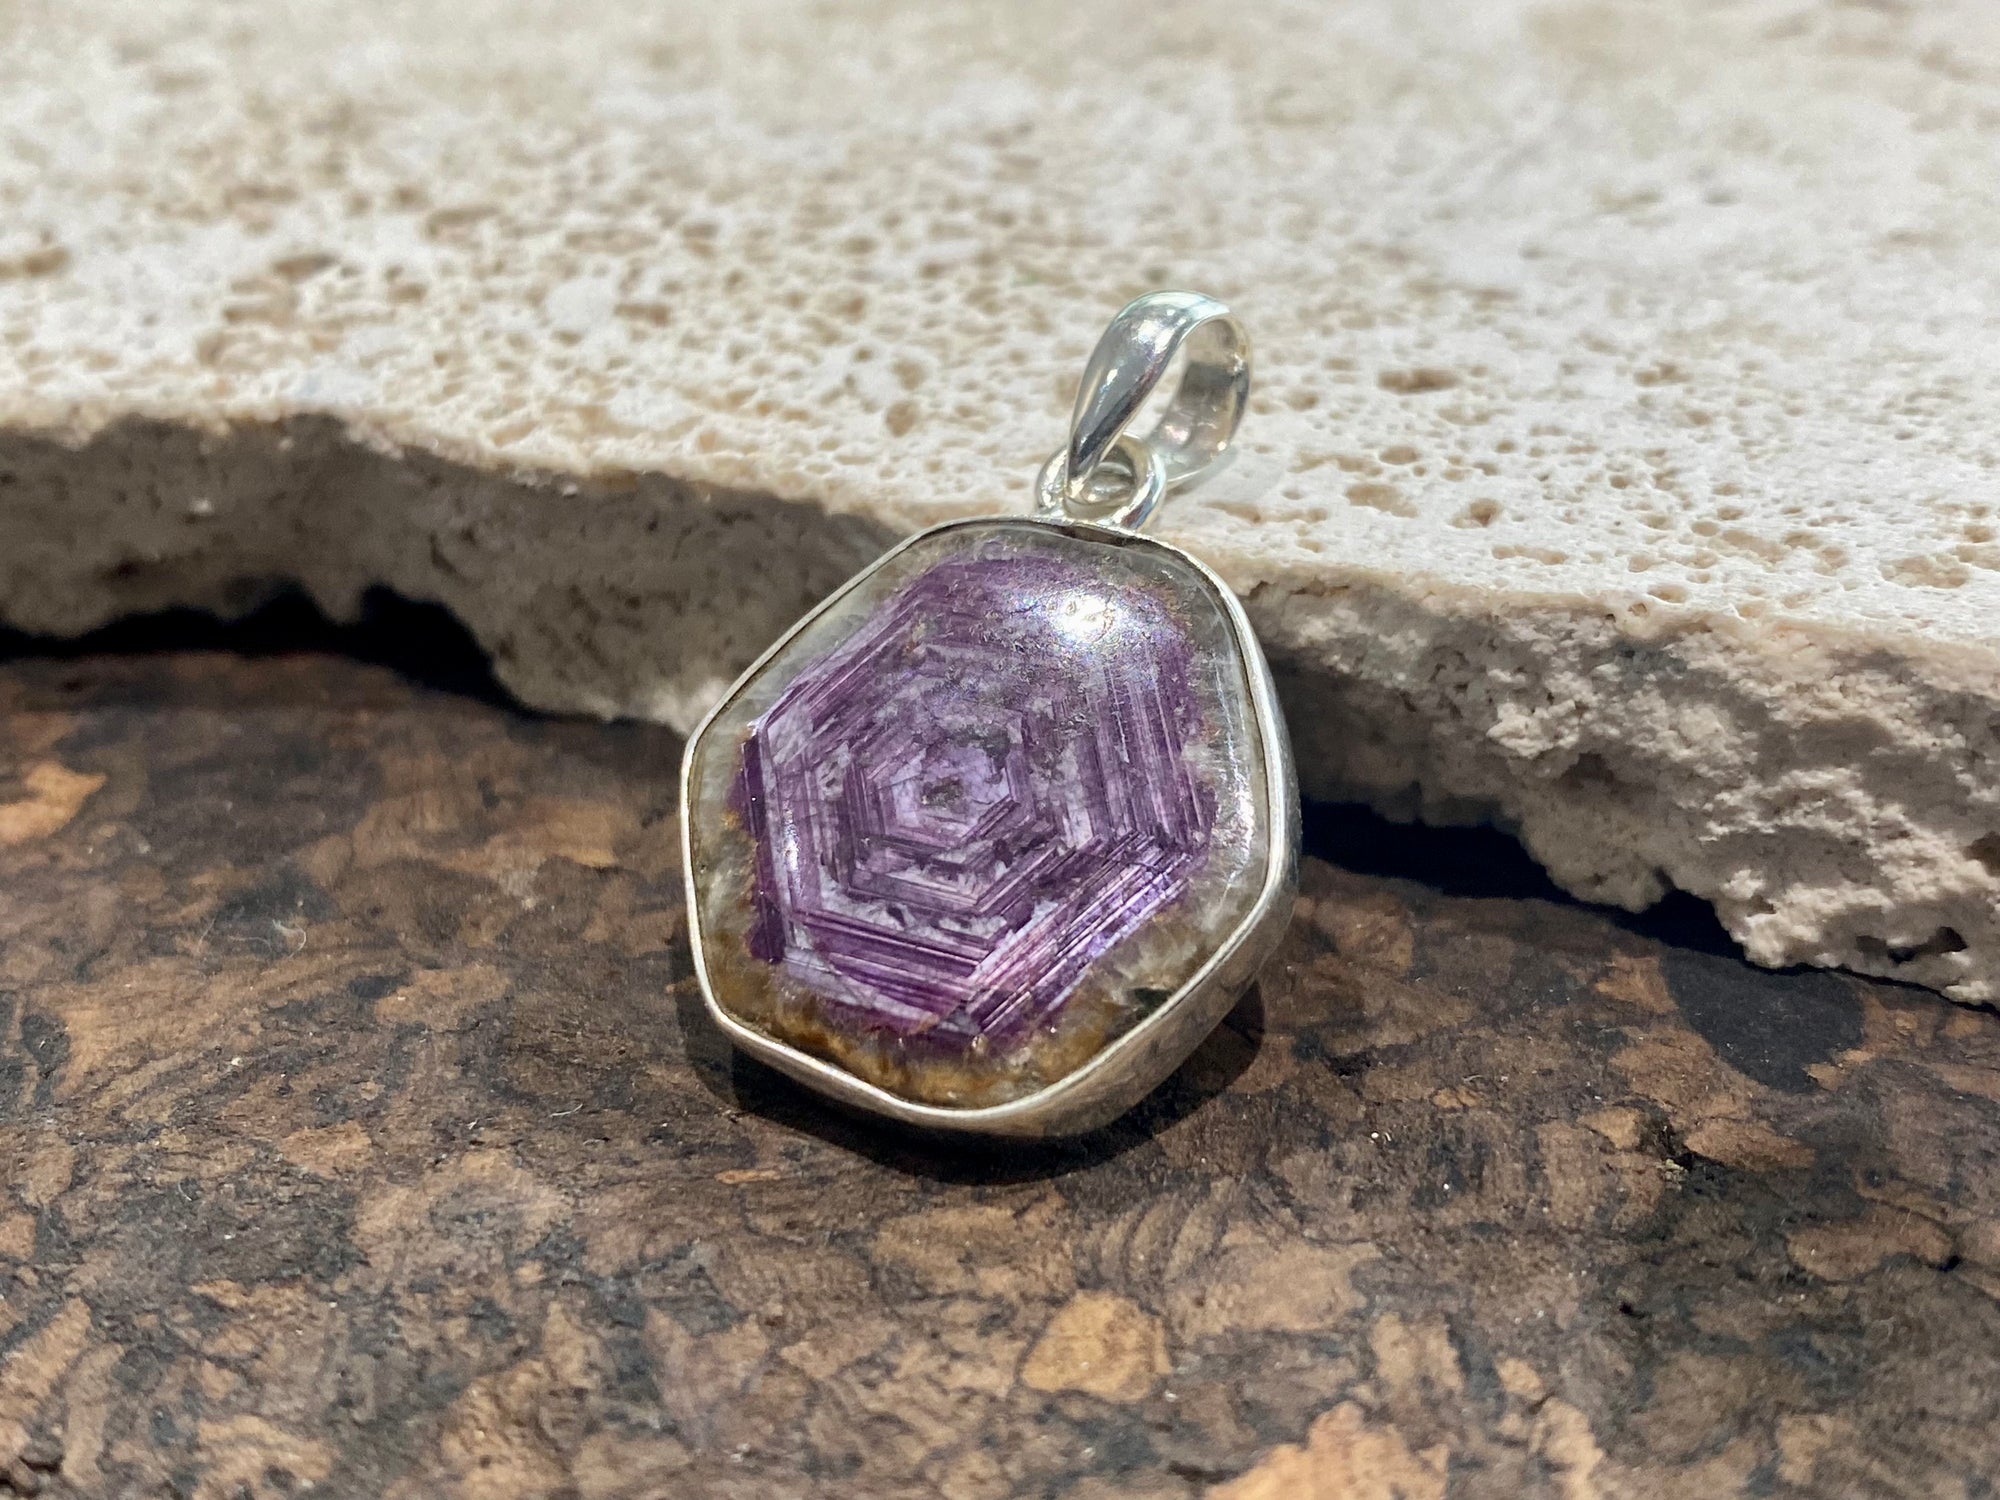 Trapiche ruby pendant with the very desirable hexagonal growth pattern, surrounded by a border of natural quartz and set in sterling silver. Height including bail 3.3 cm, width 2.2 cm